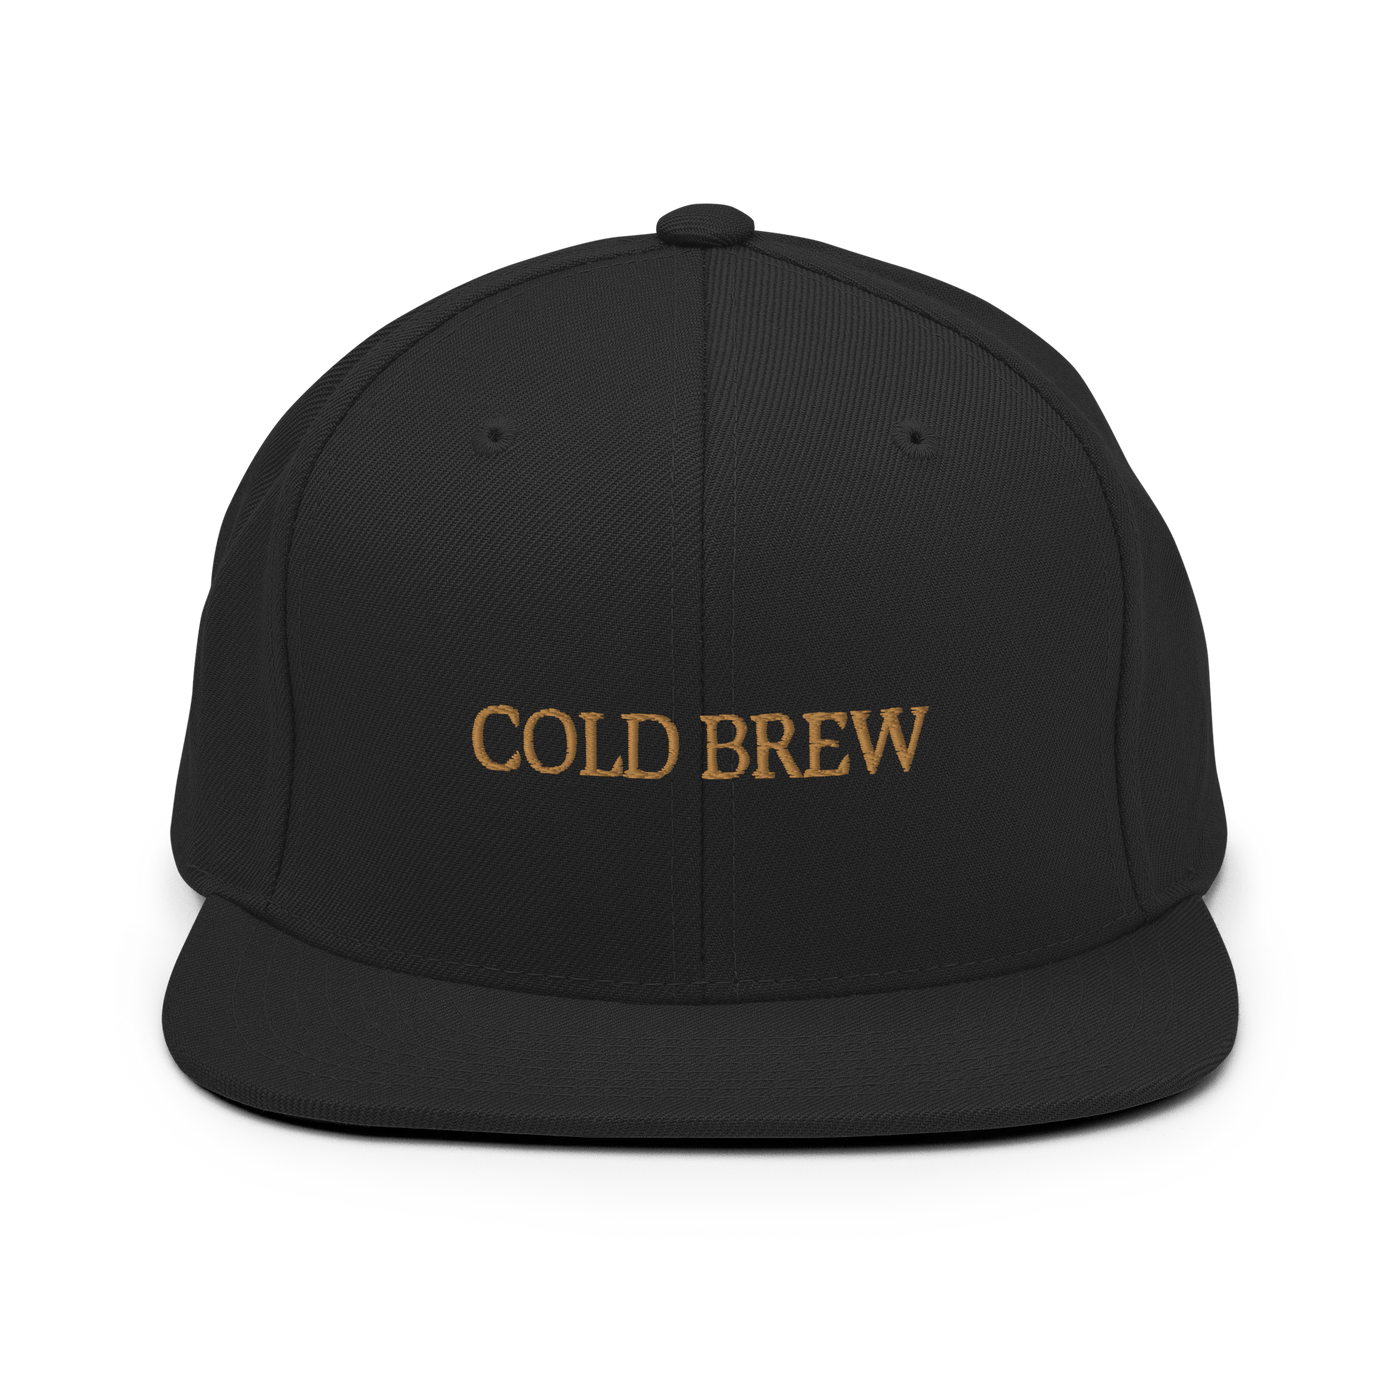 Cold Brew Snapback Hat - Black - - Just Another Cap Store